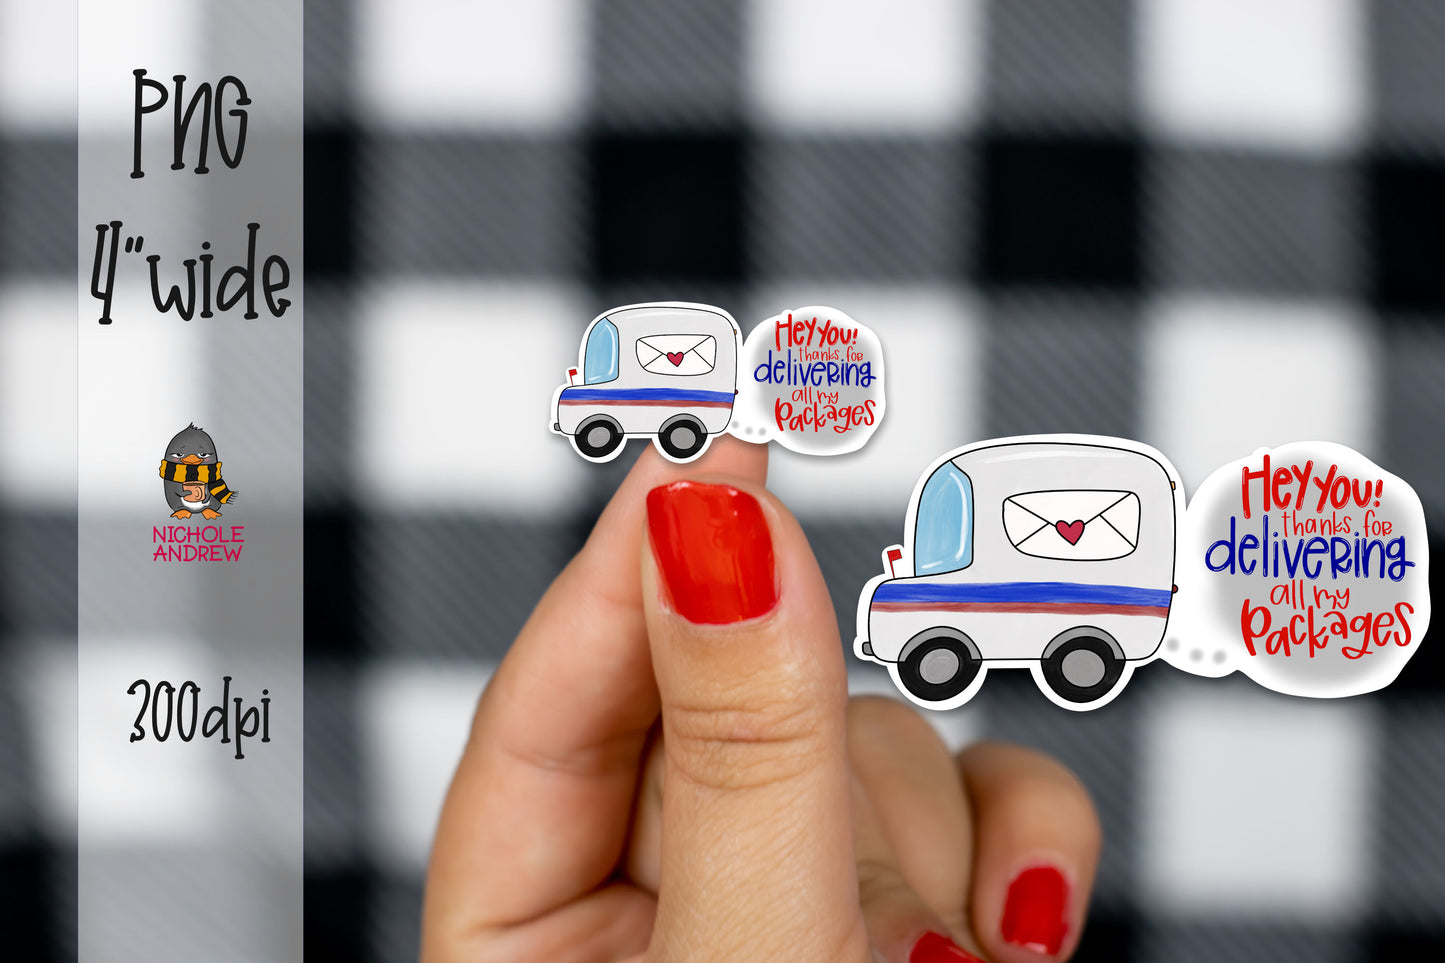 Hey You Thanks For Delivering My Packages | Printable Sticker